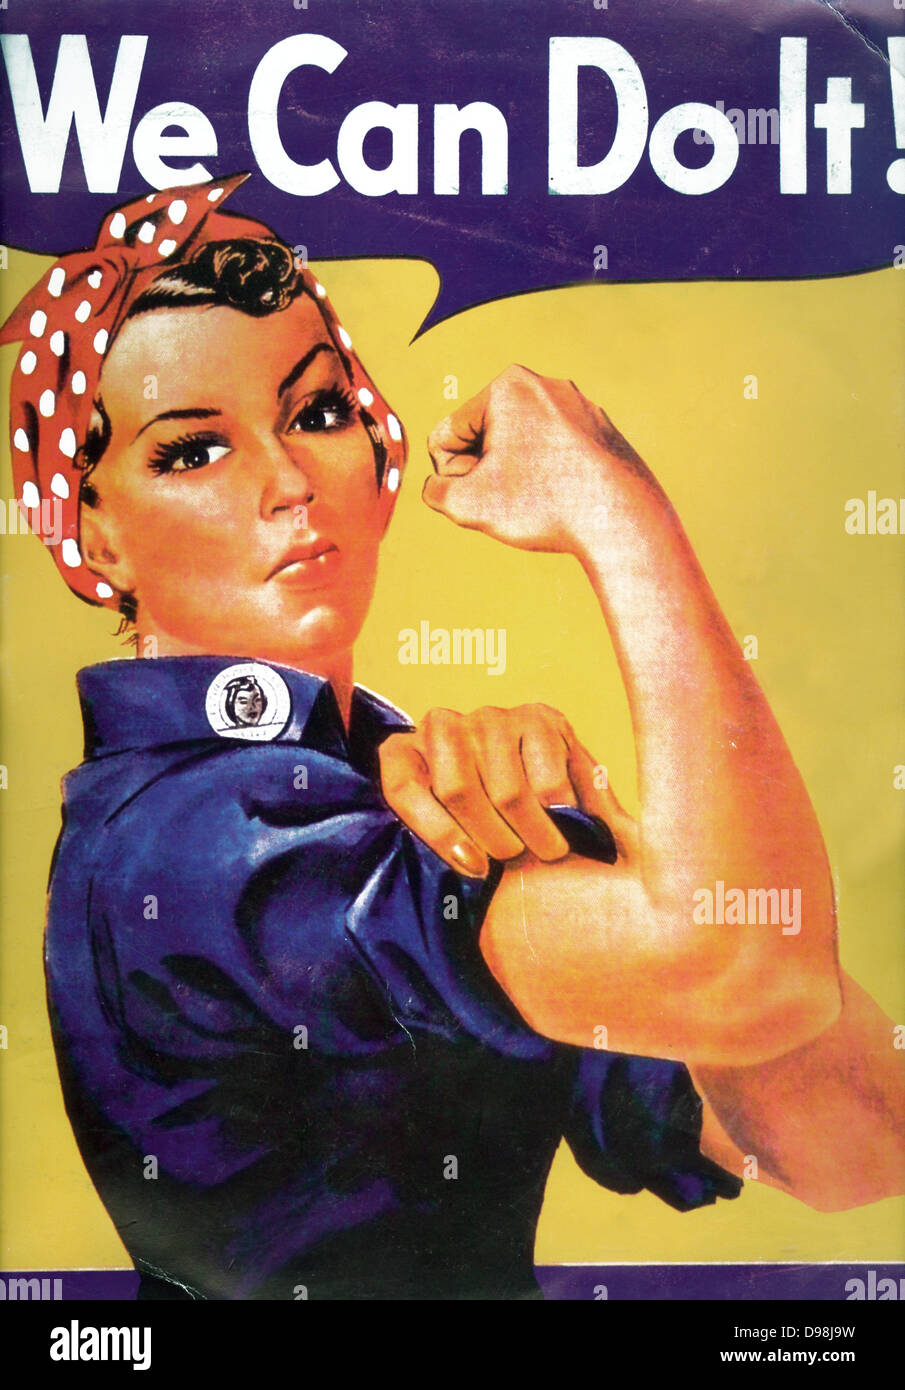 Rosie the Riveter, 1942 World War II Poster. We Can Do It! Vintage World War II poster by J. Howard Miller. Rosie the Riveter is a cultural icon of the United States Stock Photo